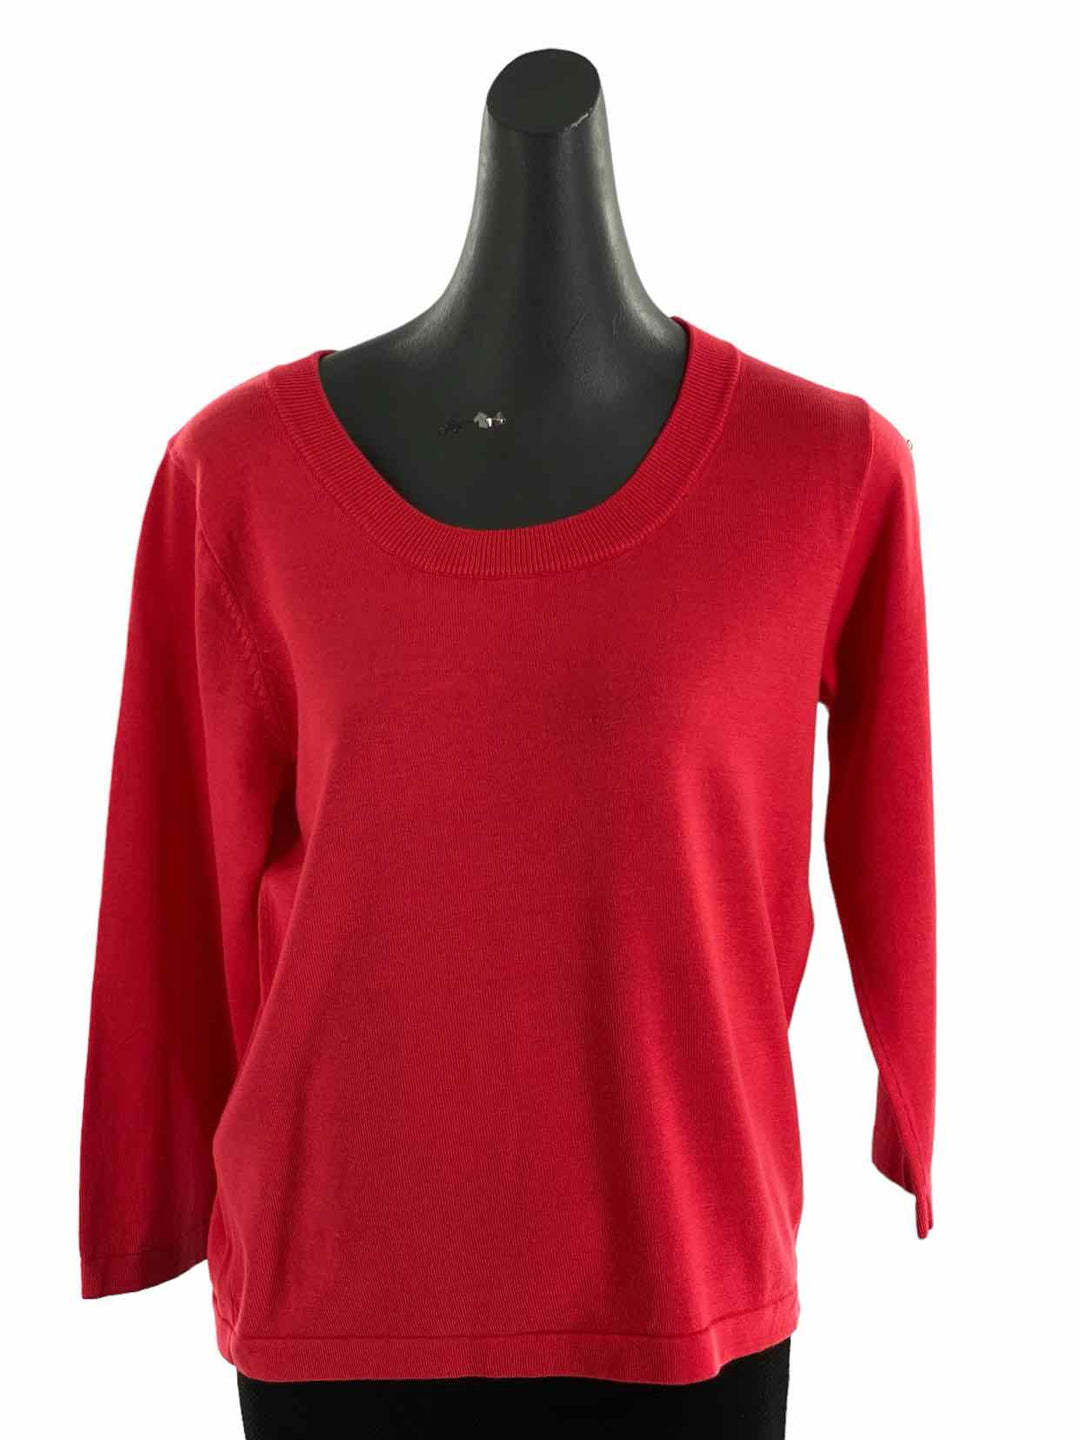 Coldwater Creek Size L Red Sweater